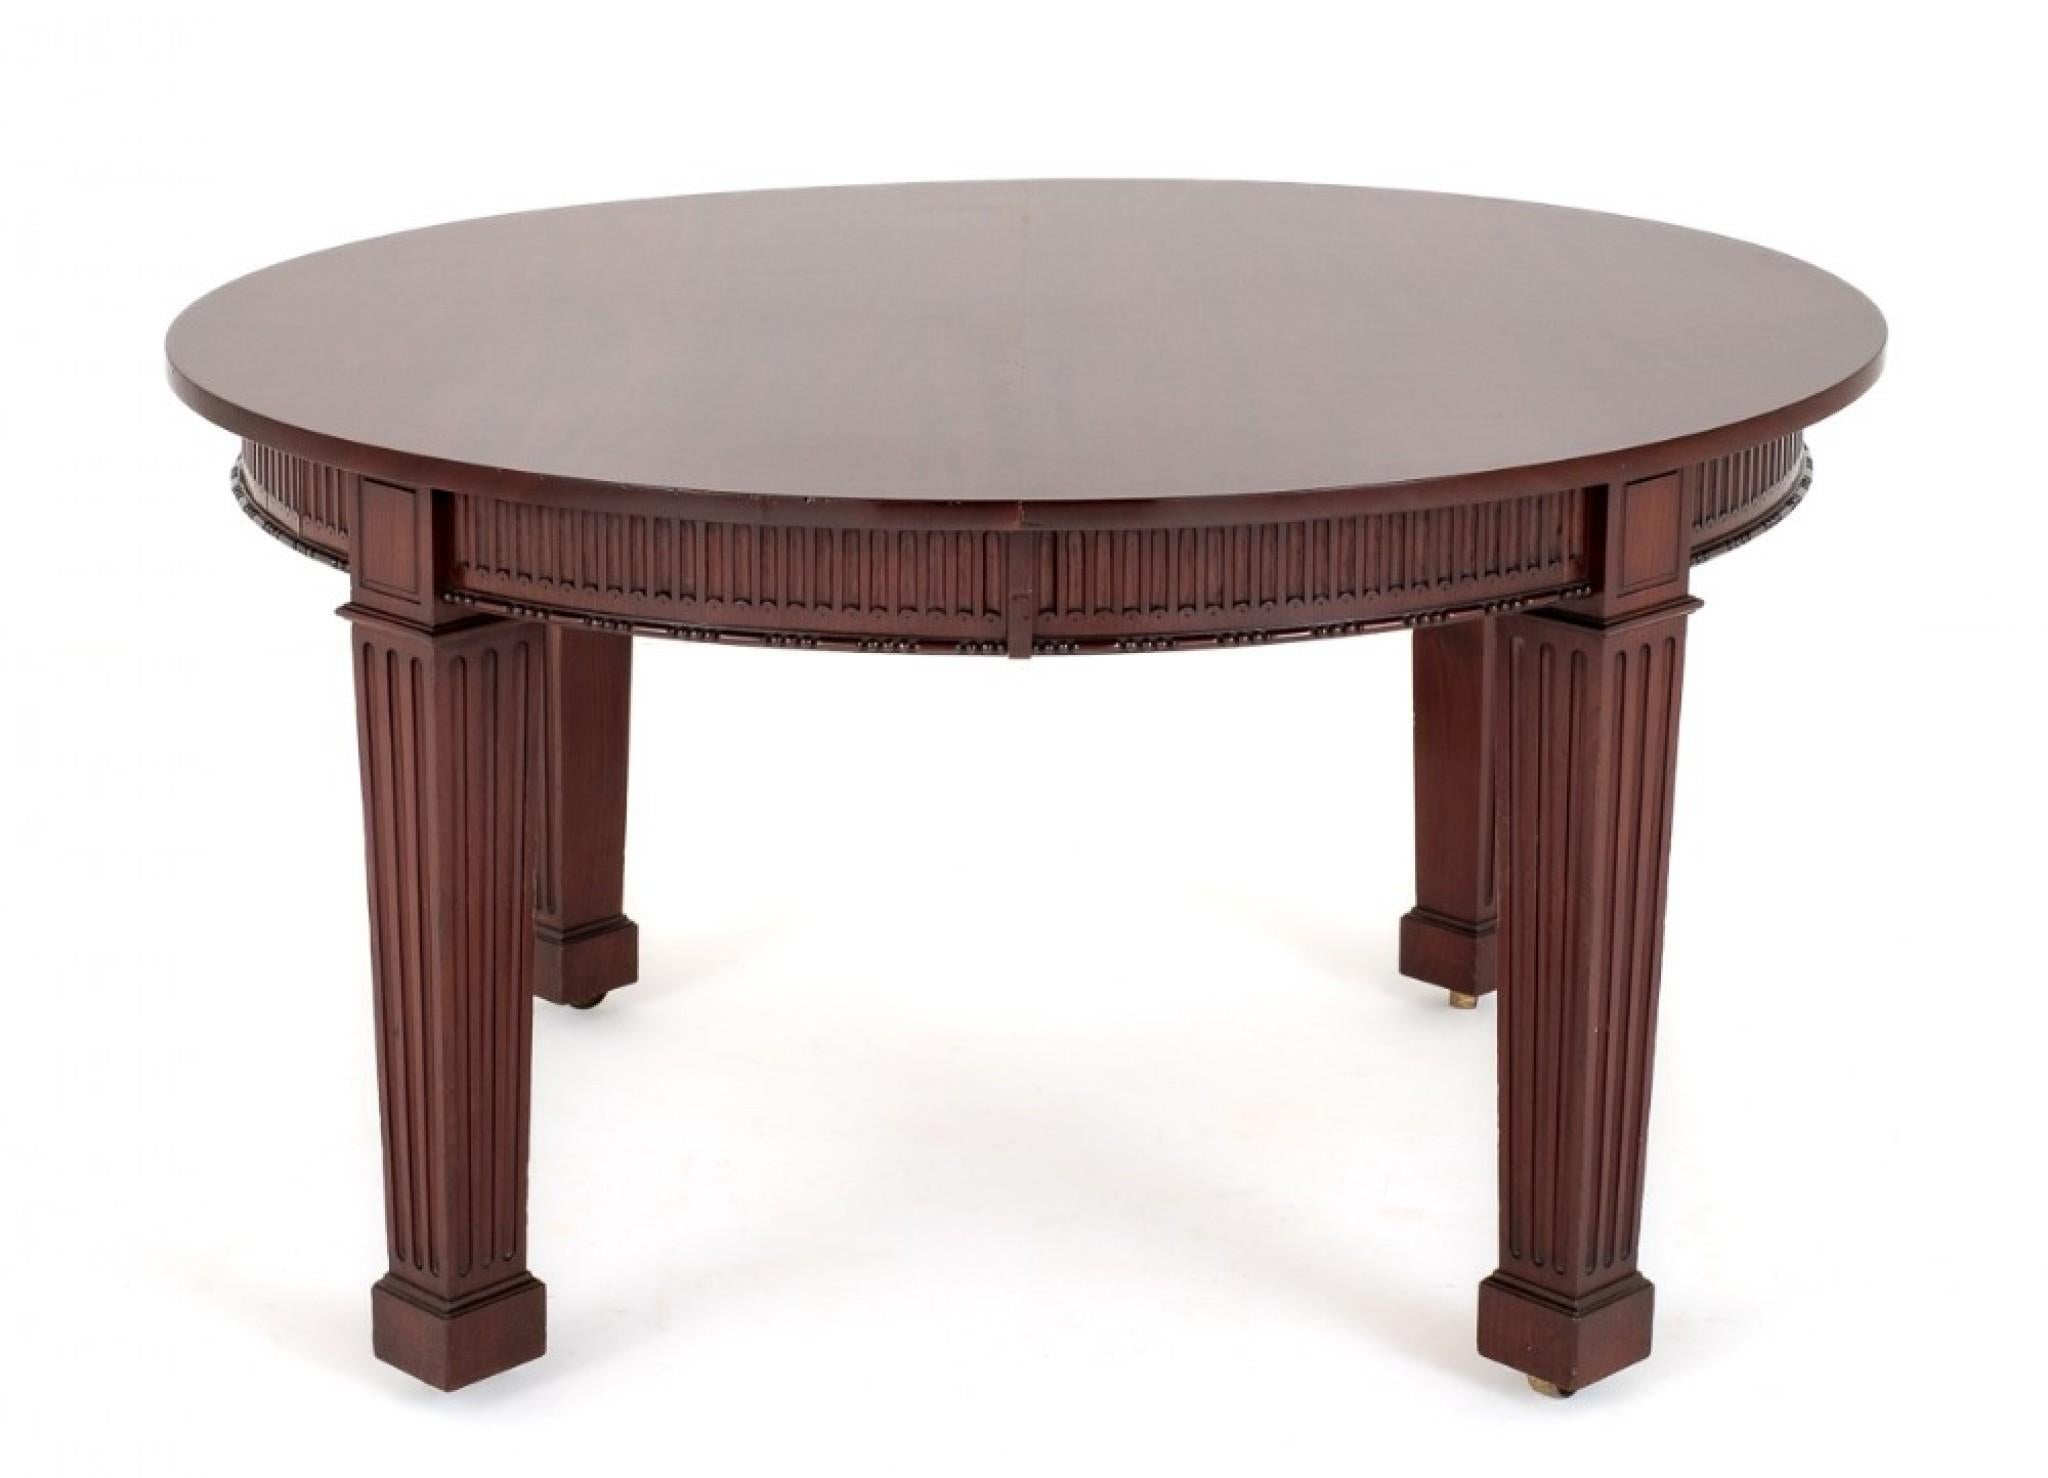 Late 19th Century Period Victorian Dining Table Extending Mahogany 2 Leaf For Sale